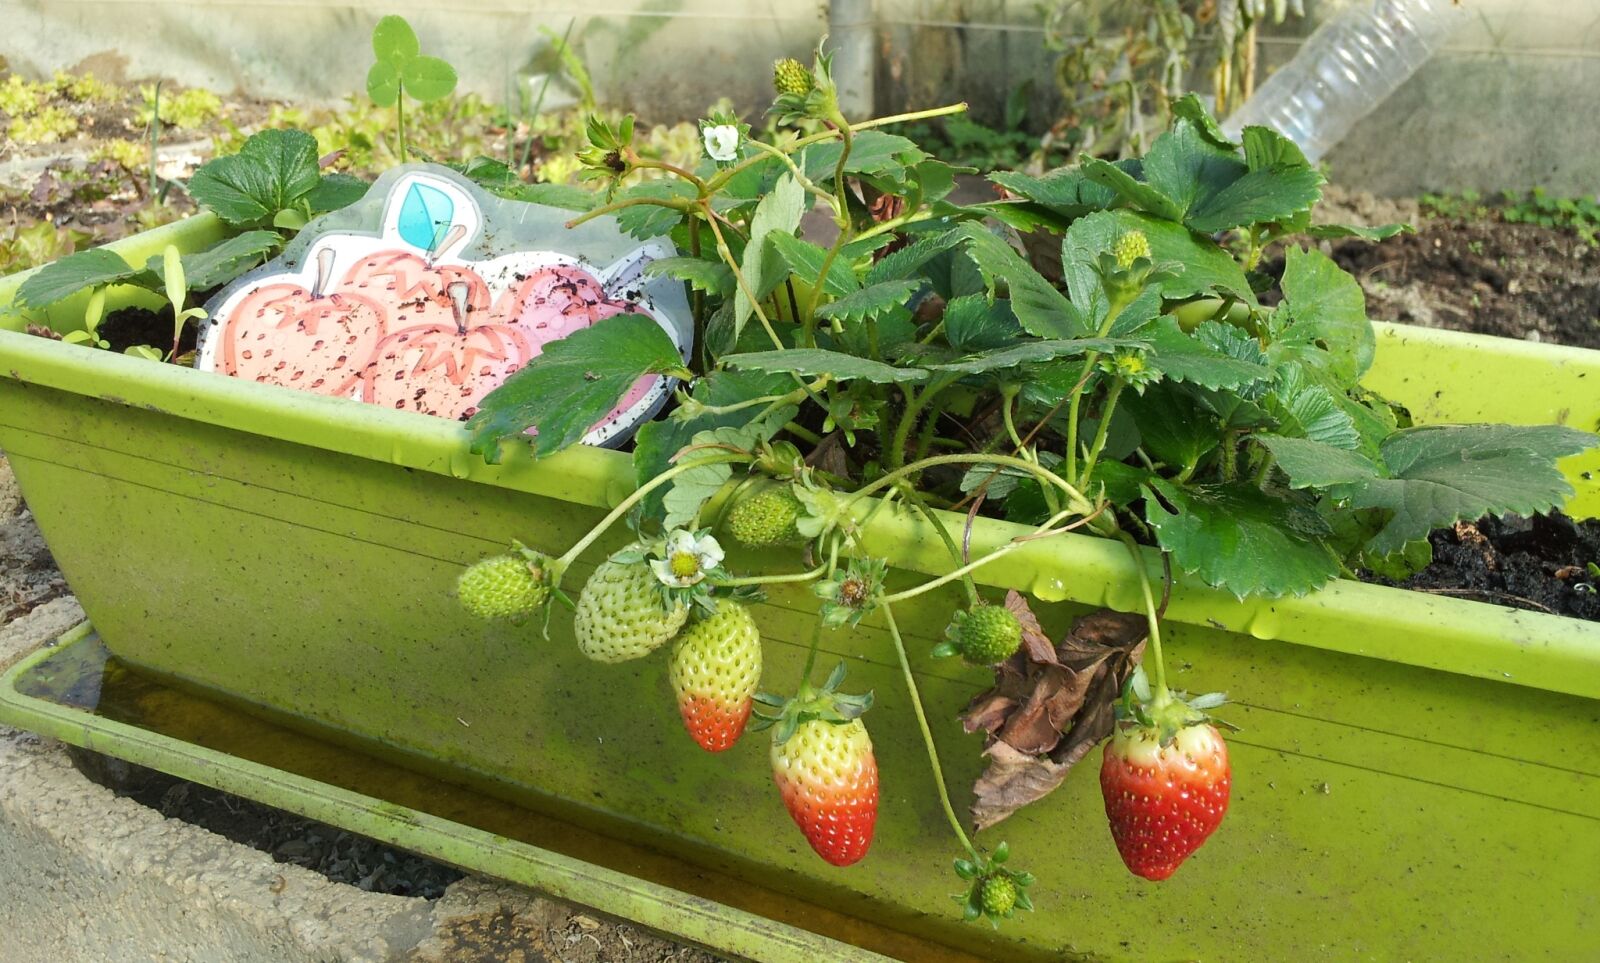 Samsung Galaxy S2 sample photo. Strawberries, cultivation, ecological photography